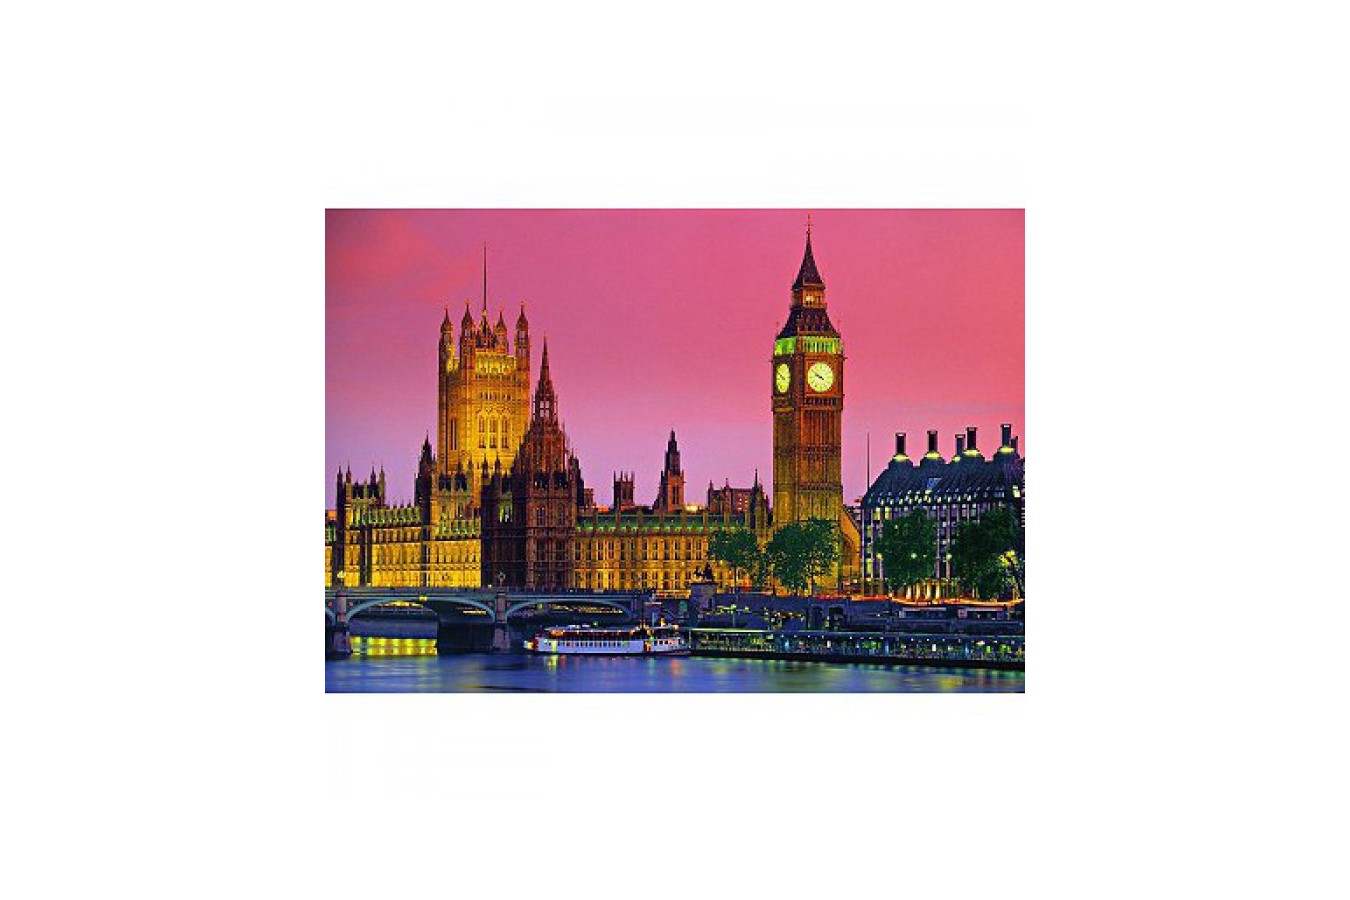 Puzzle Clementoni - London by Night, 500 piese (4915)